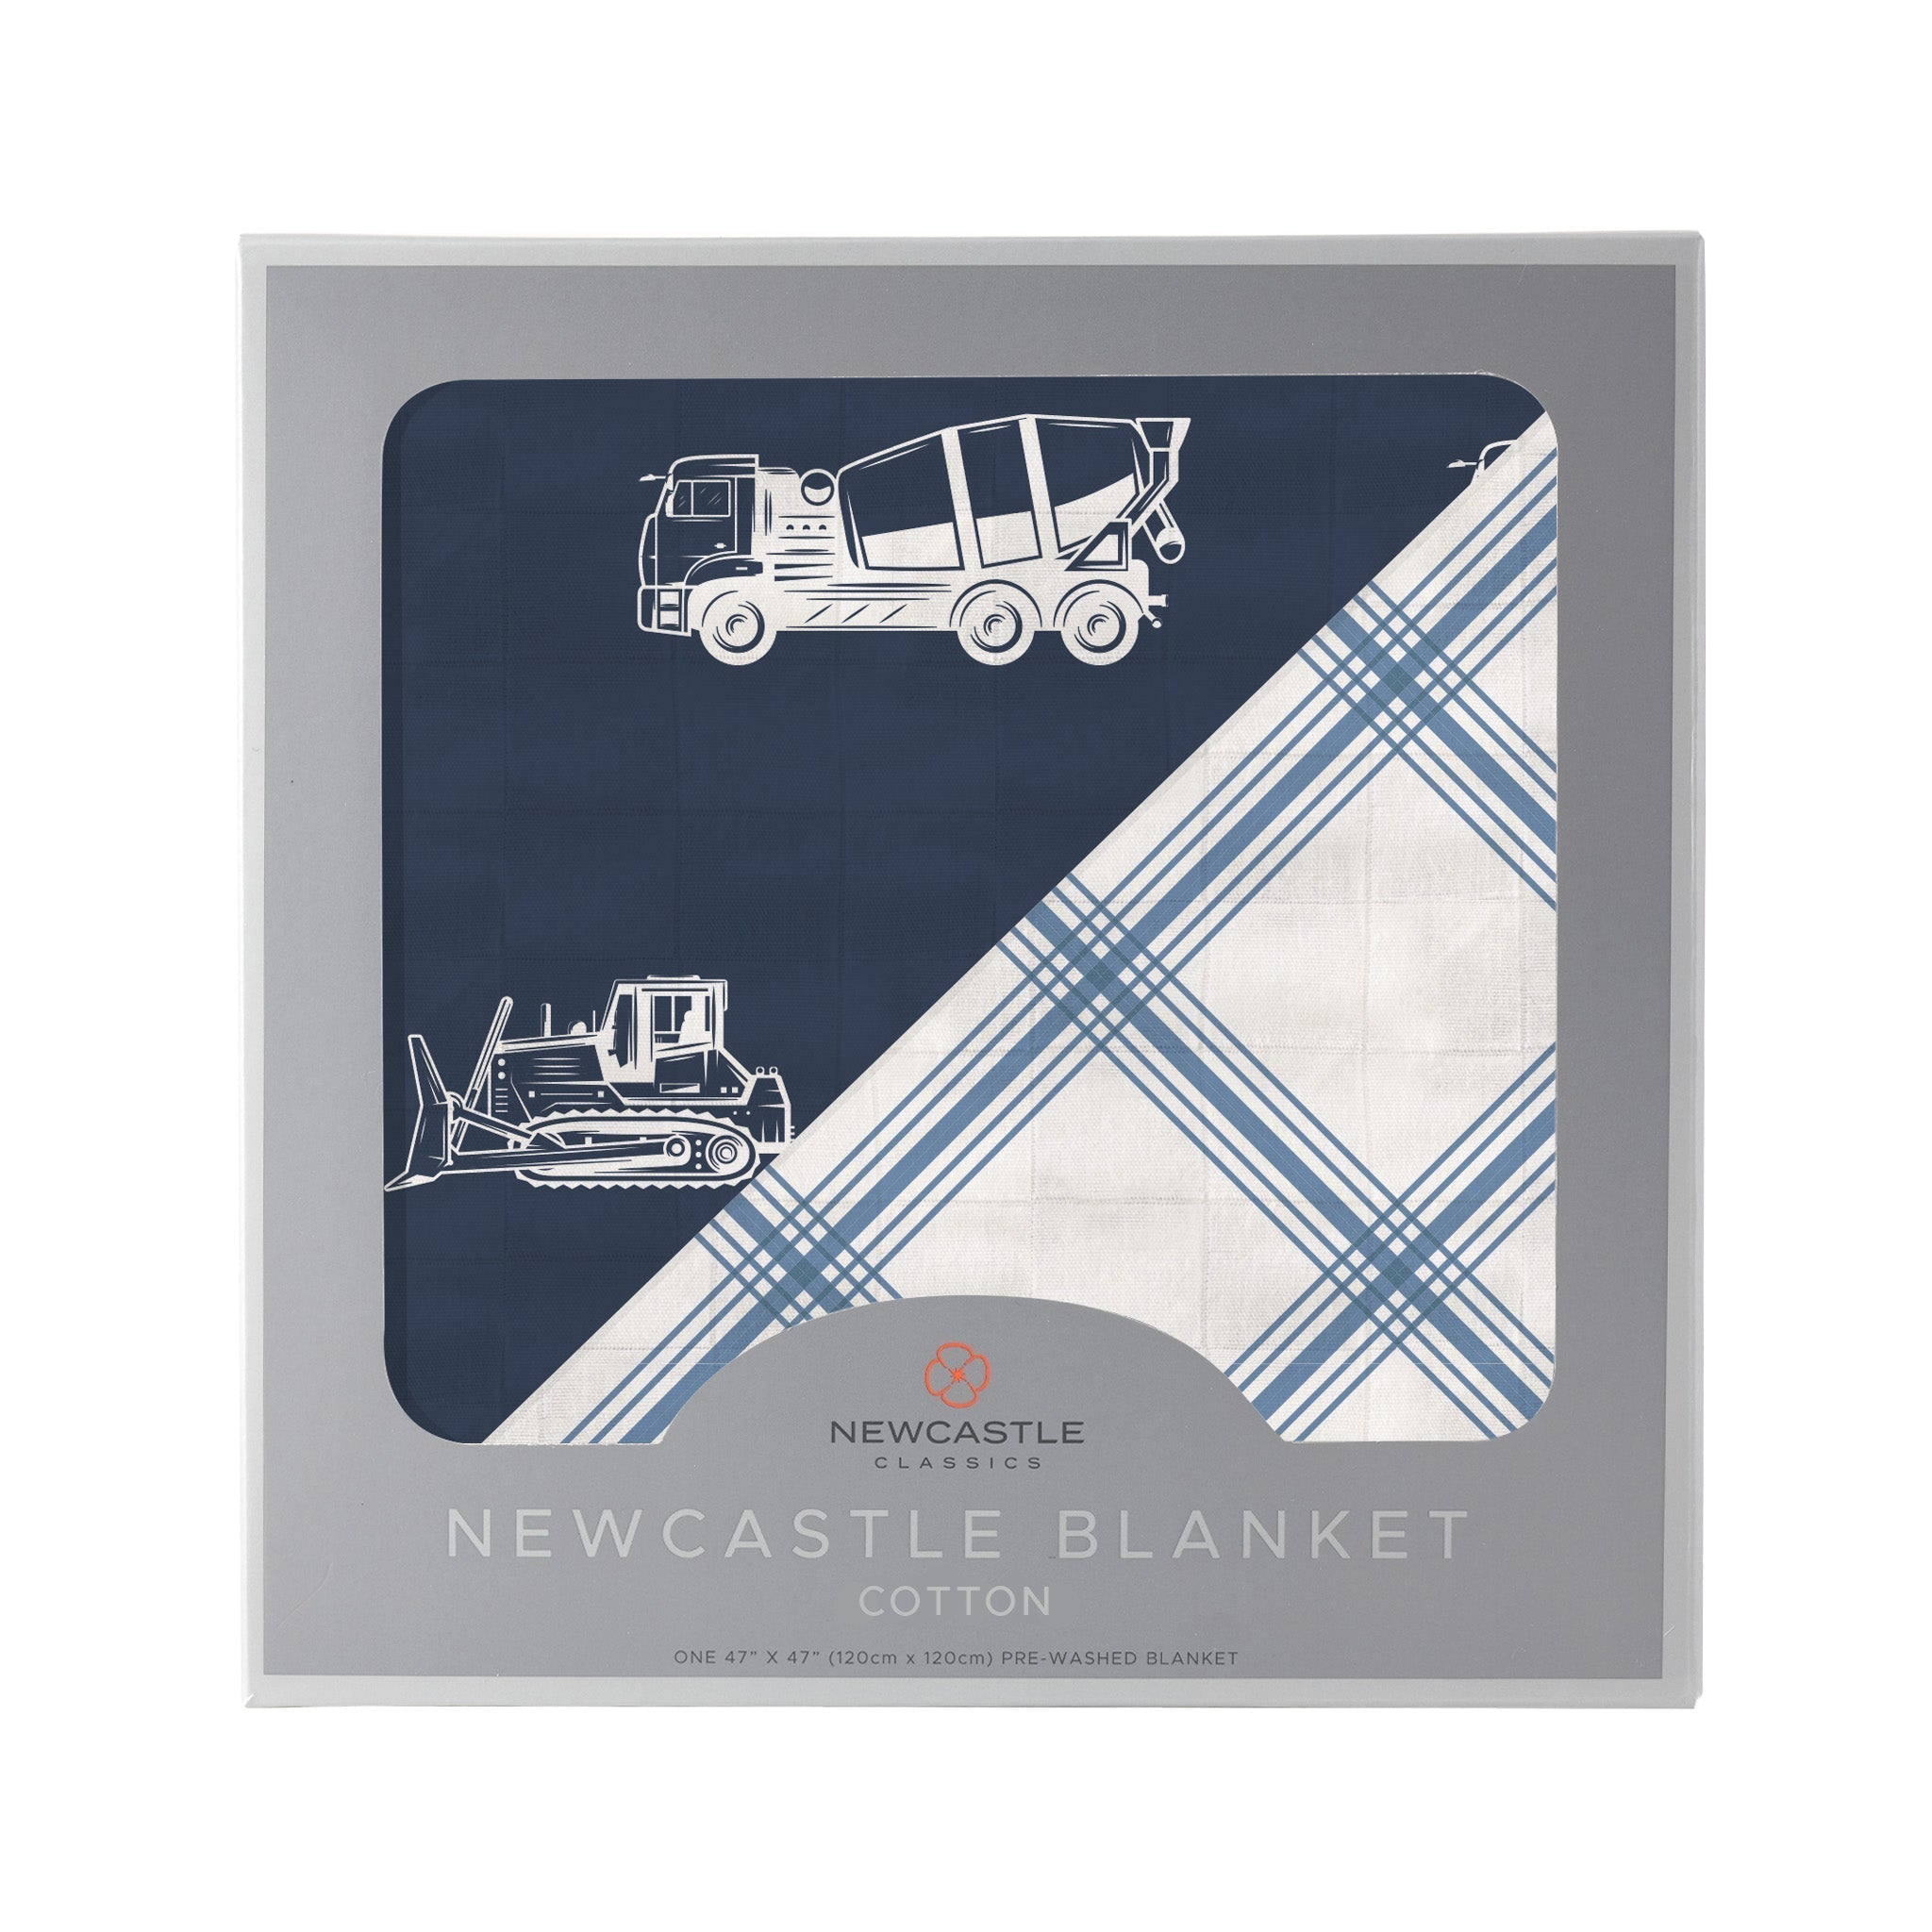 Things That Go and Buffalo Check Plaid Newcastle Blanket